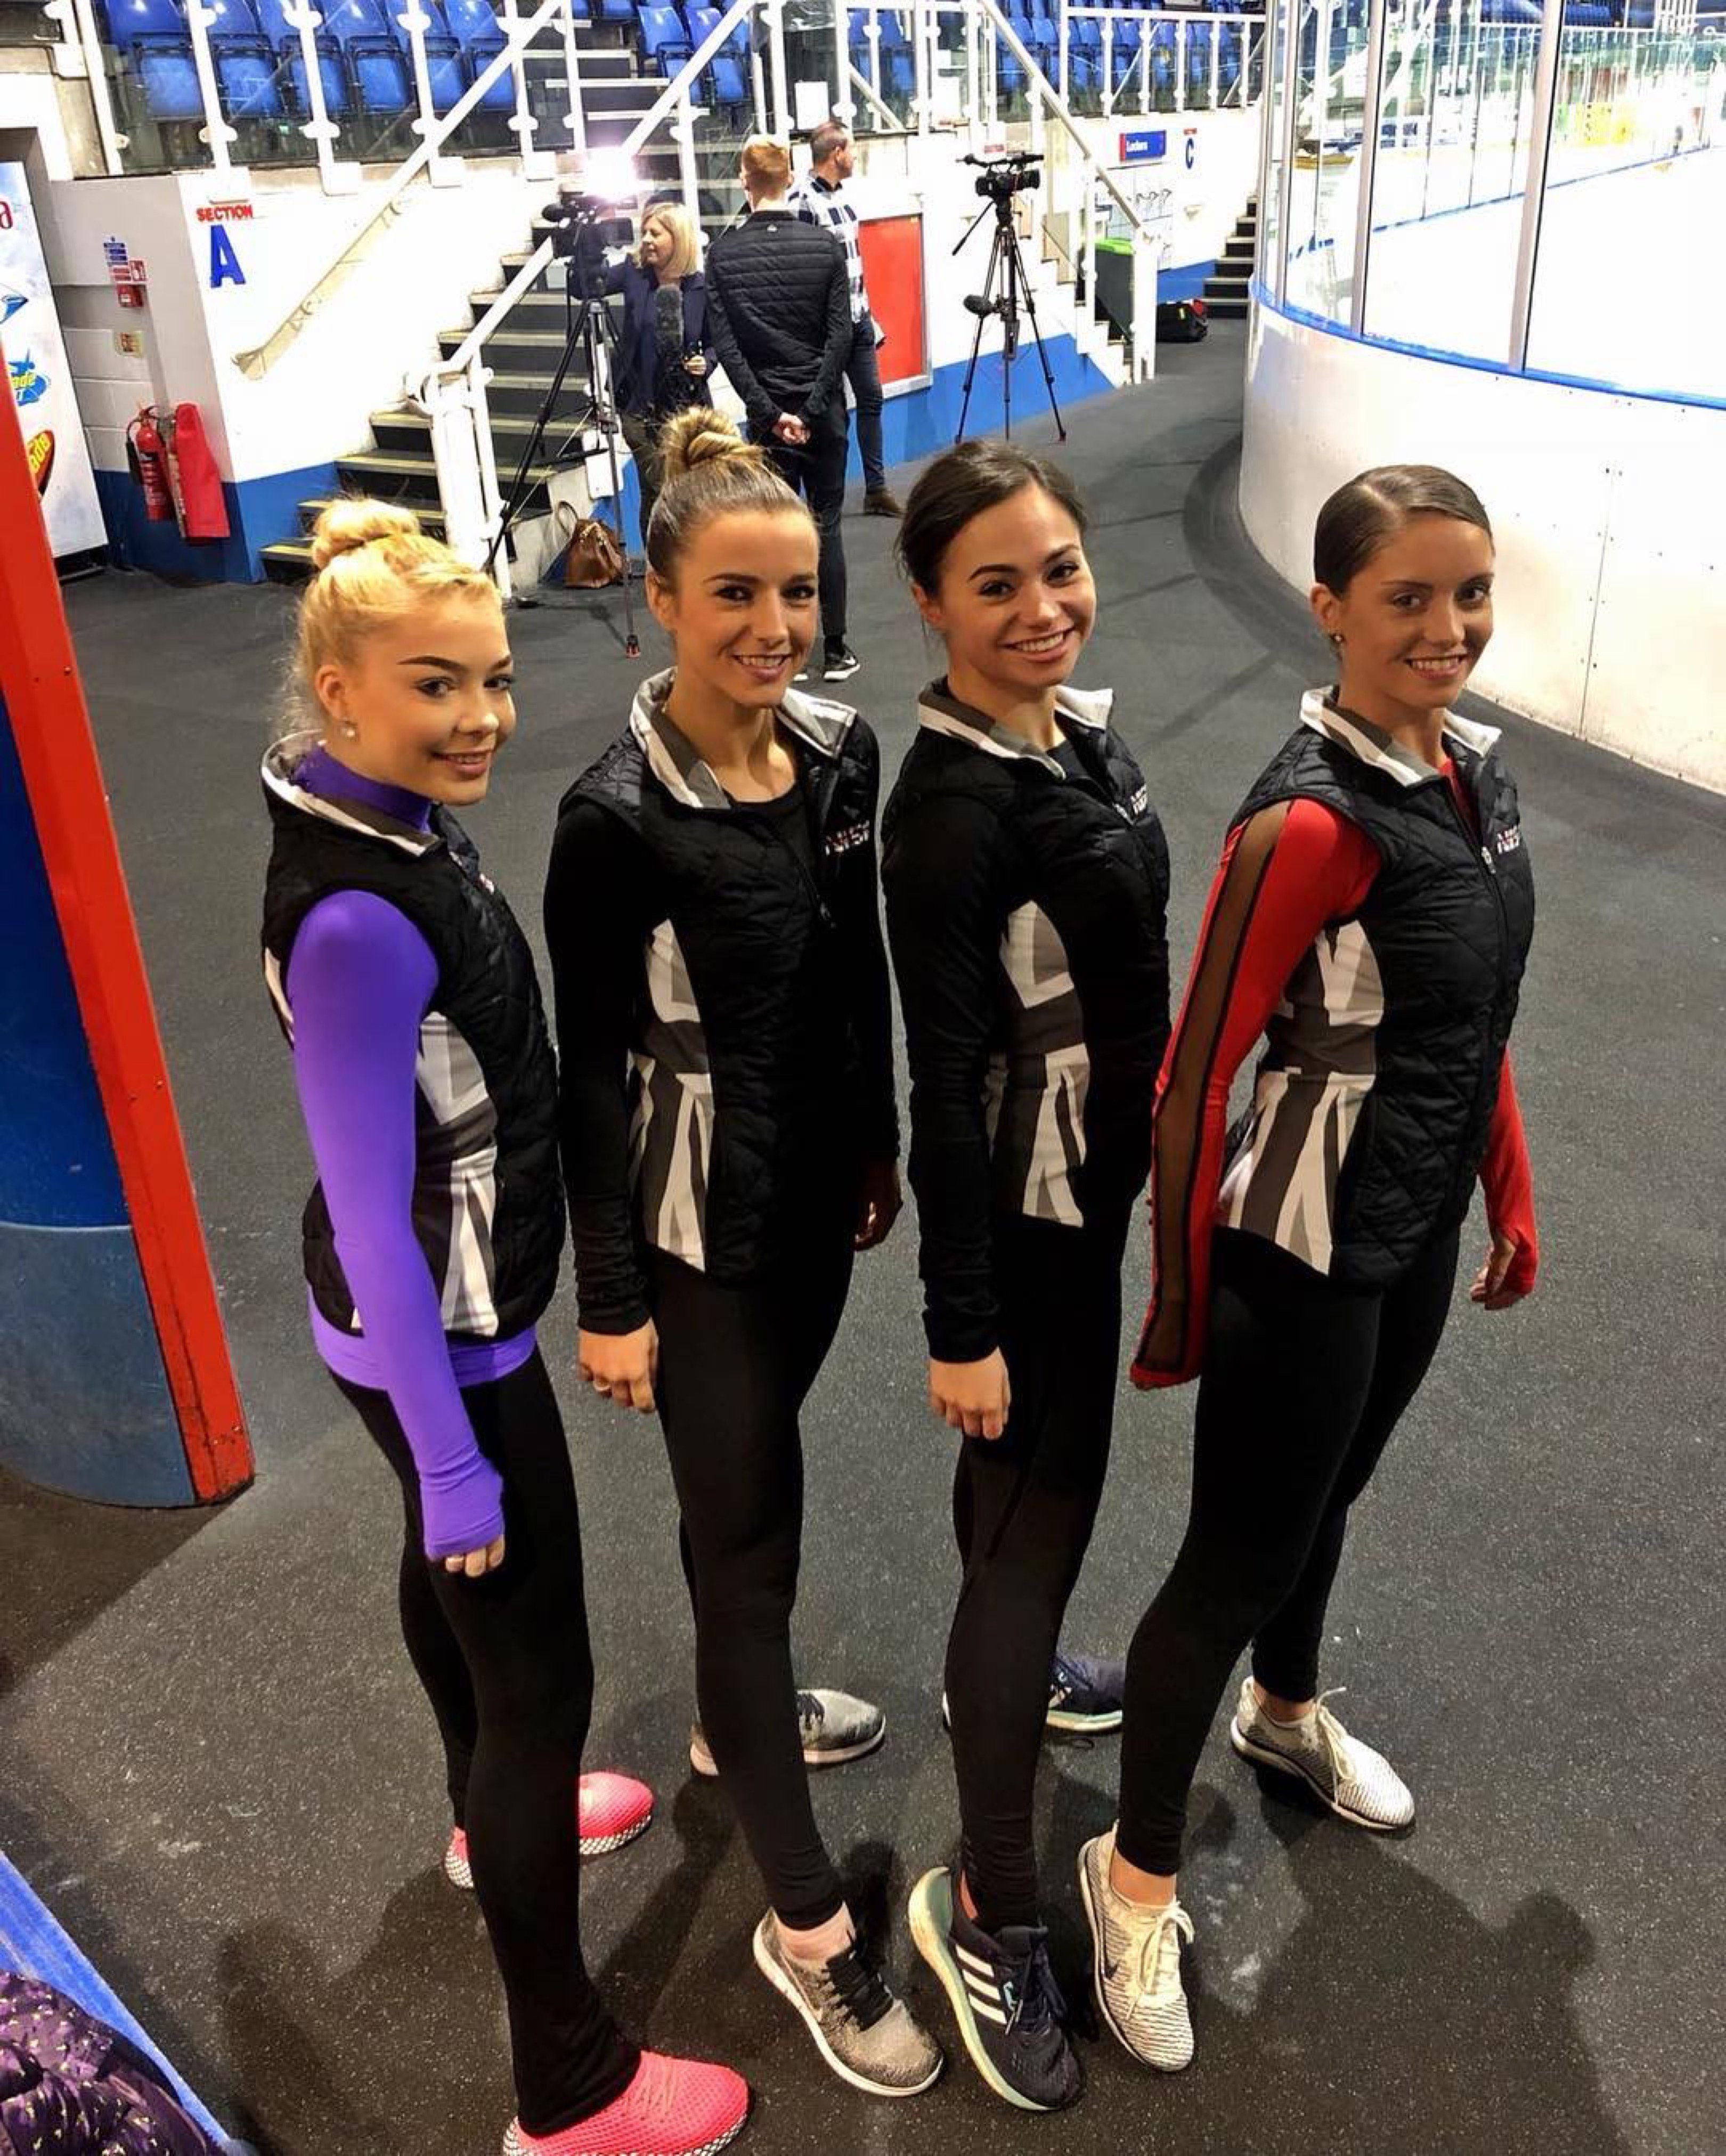 Chique Sport on X: New Chique Sport squad kit for these amazing #TeamGB  🇬🇧 skaters @ice_dundee @danni_harrisonx @karlyr89 @katieepowell92  @natashamckay1495  / X